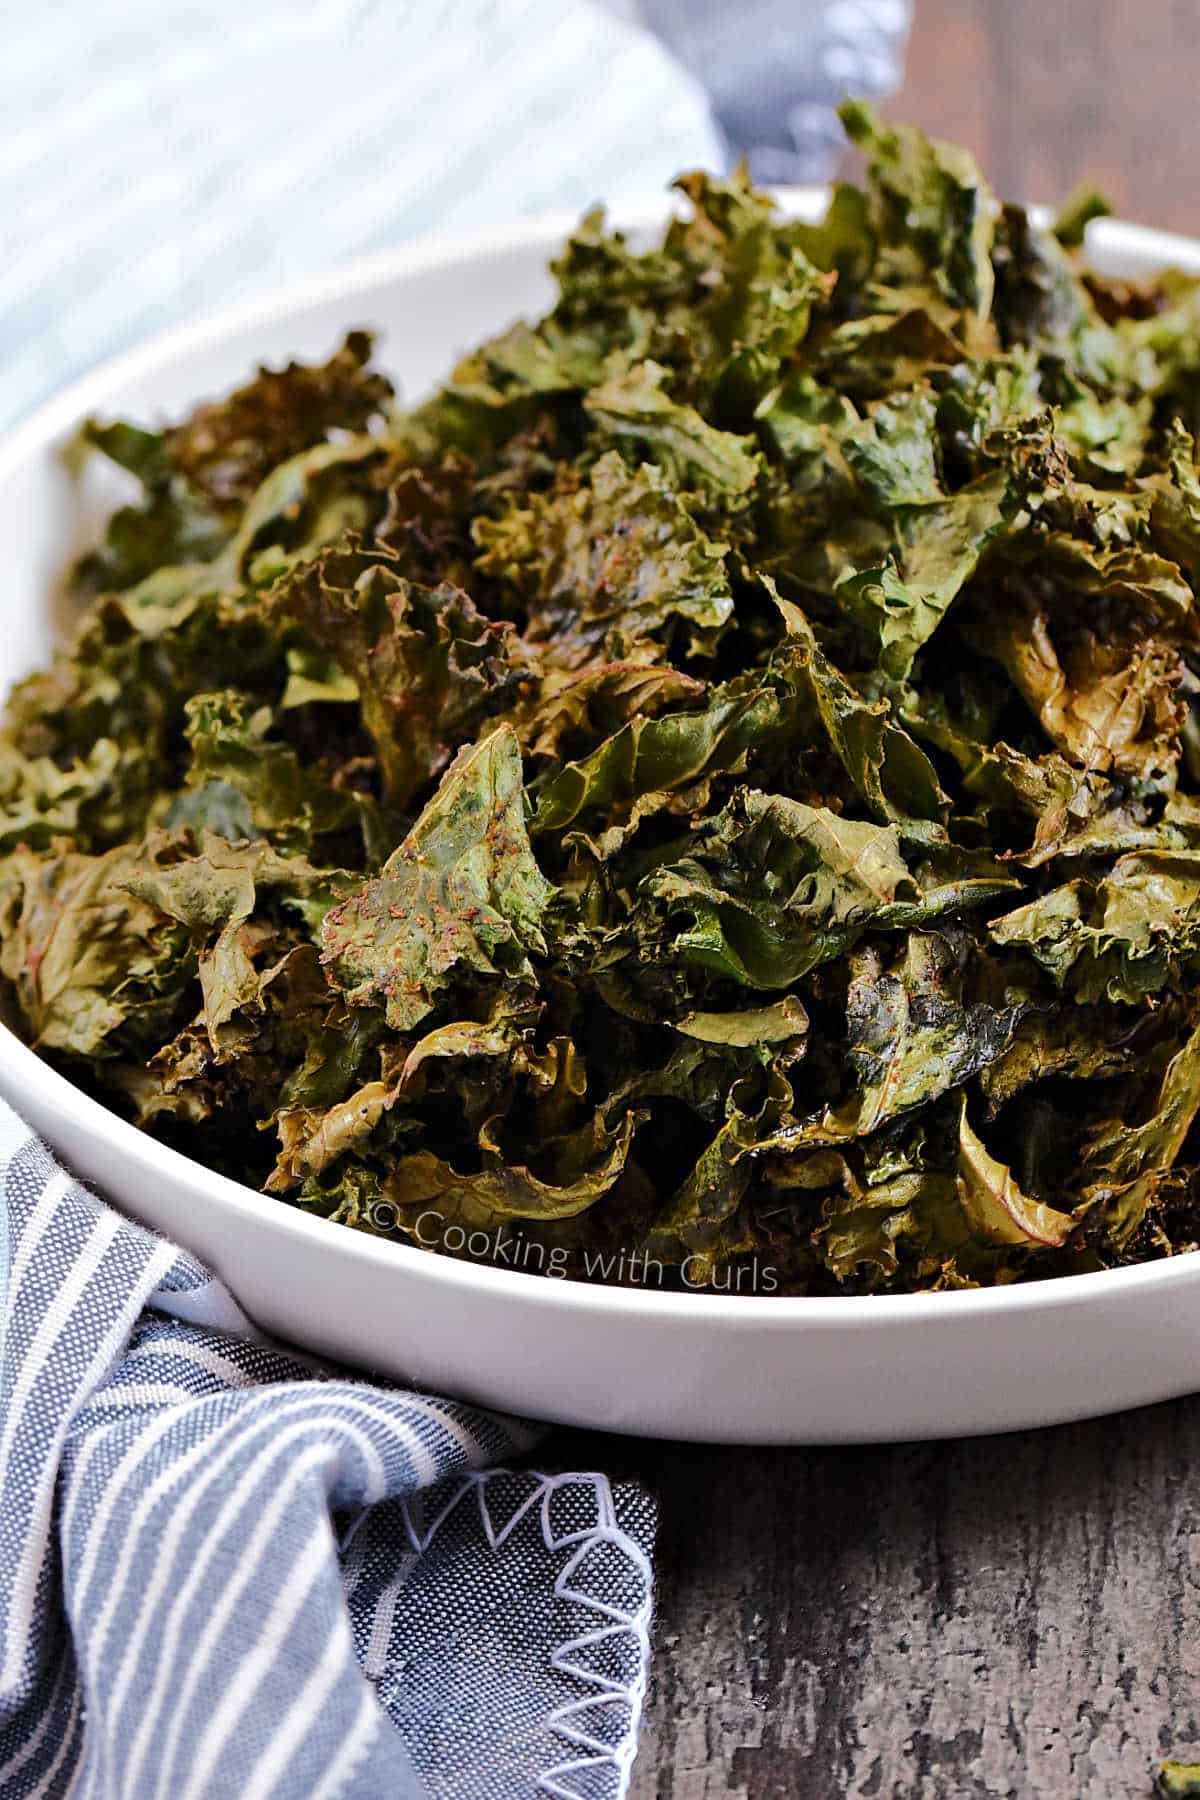 A bowl filled with seasoned kale chips sitting on a blue and white striped napkin.